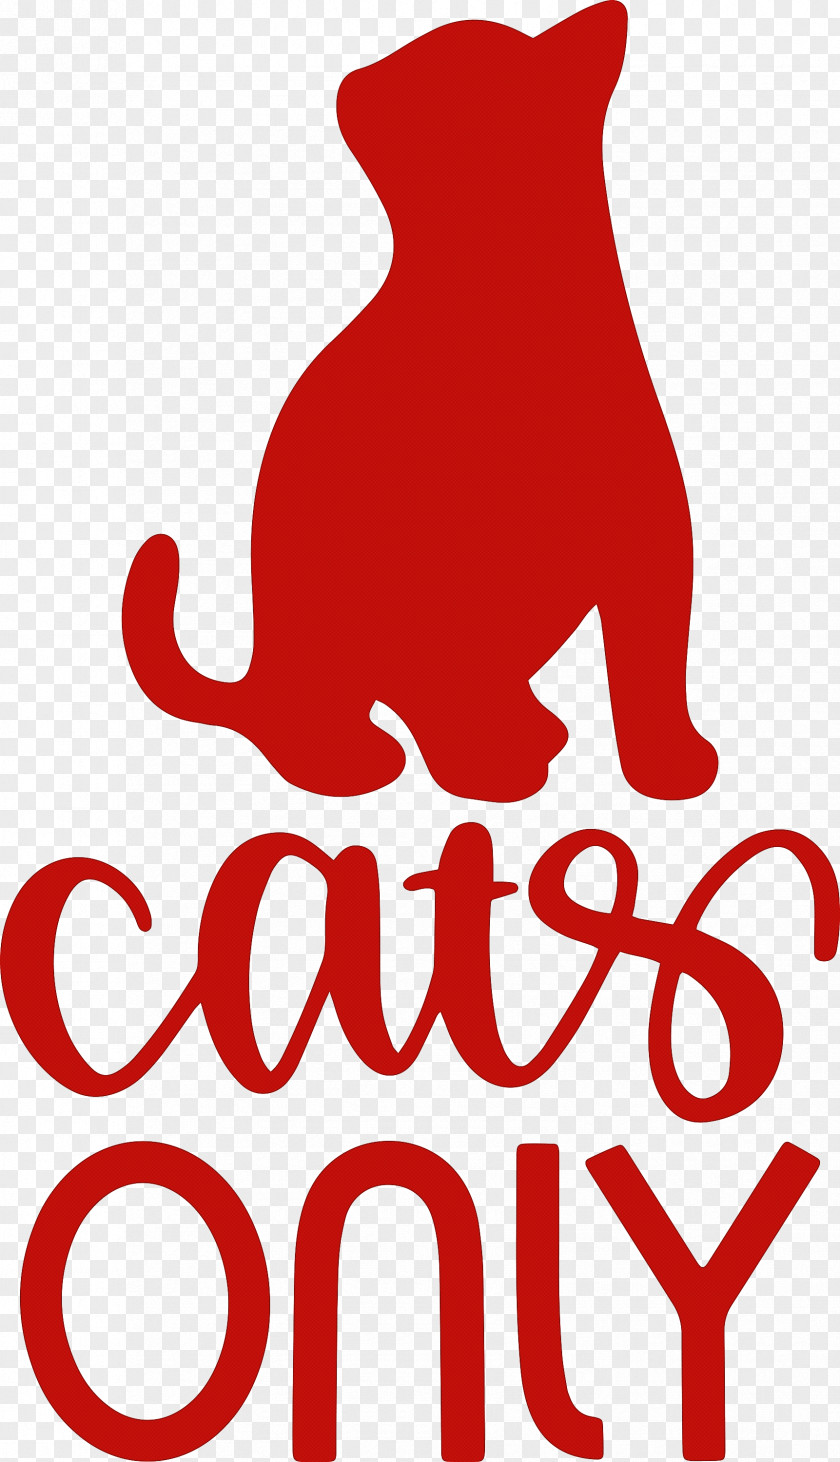 Cats Only Cat PNG